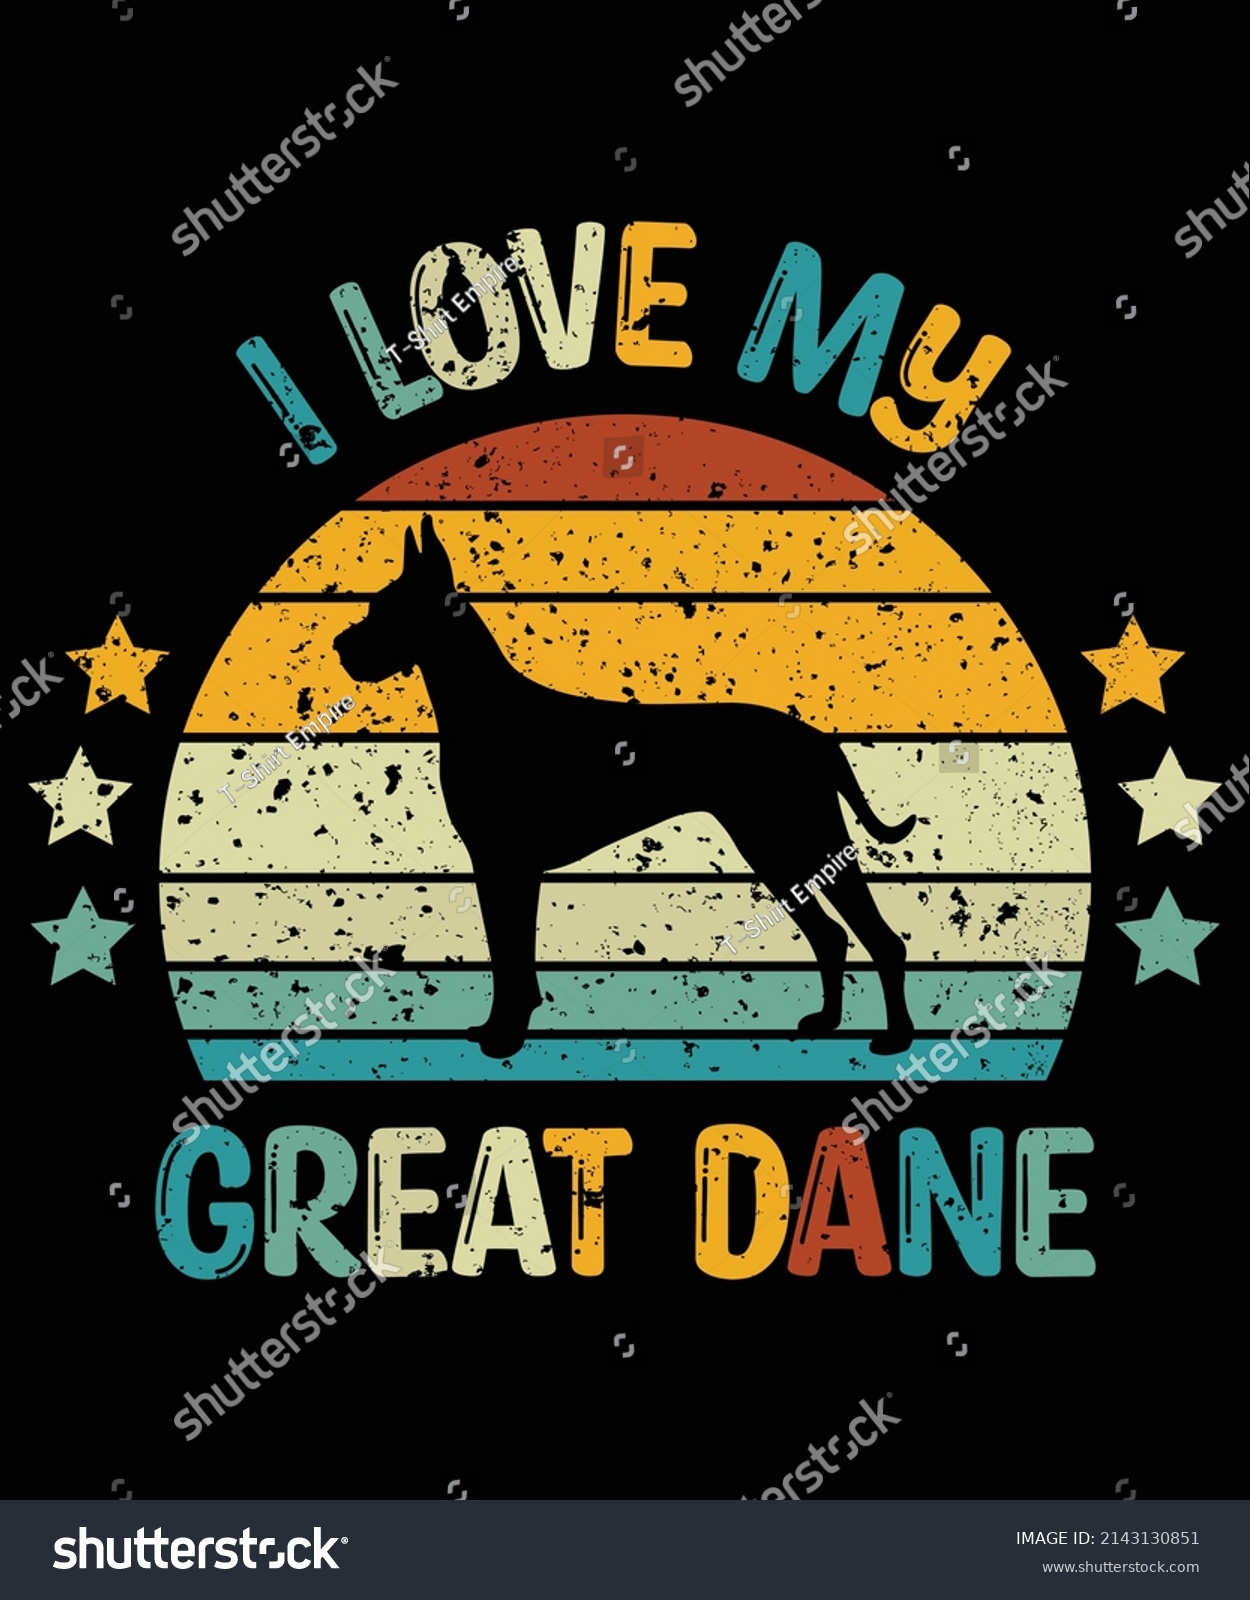 SVG of Great Dane silhouette vintage and retro t-shirt design svg